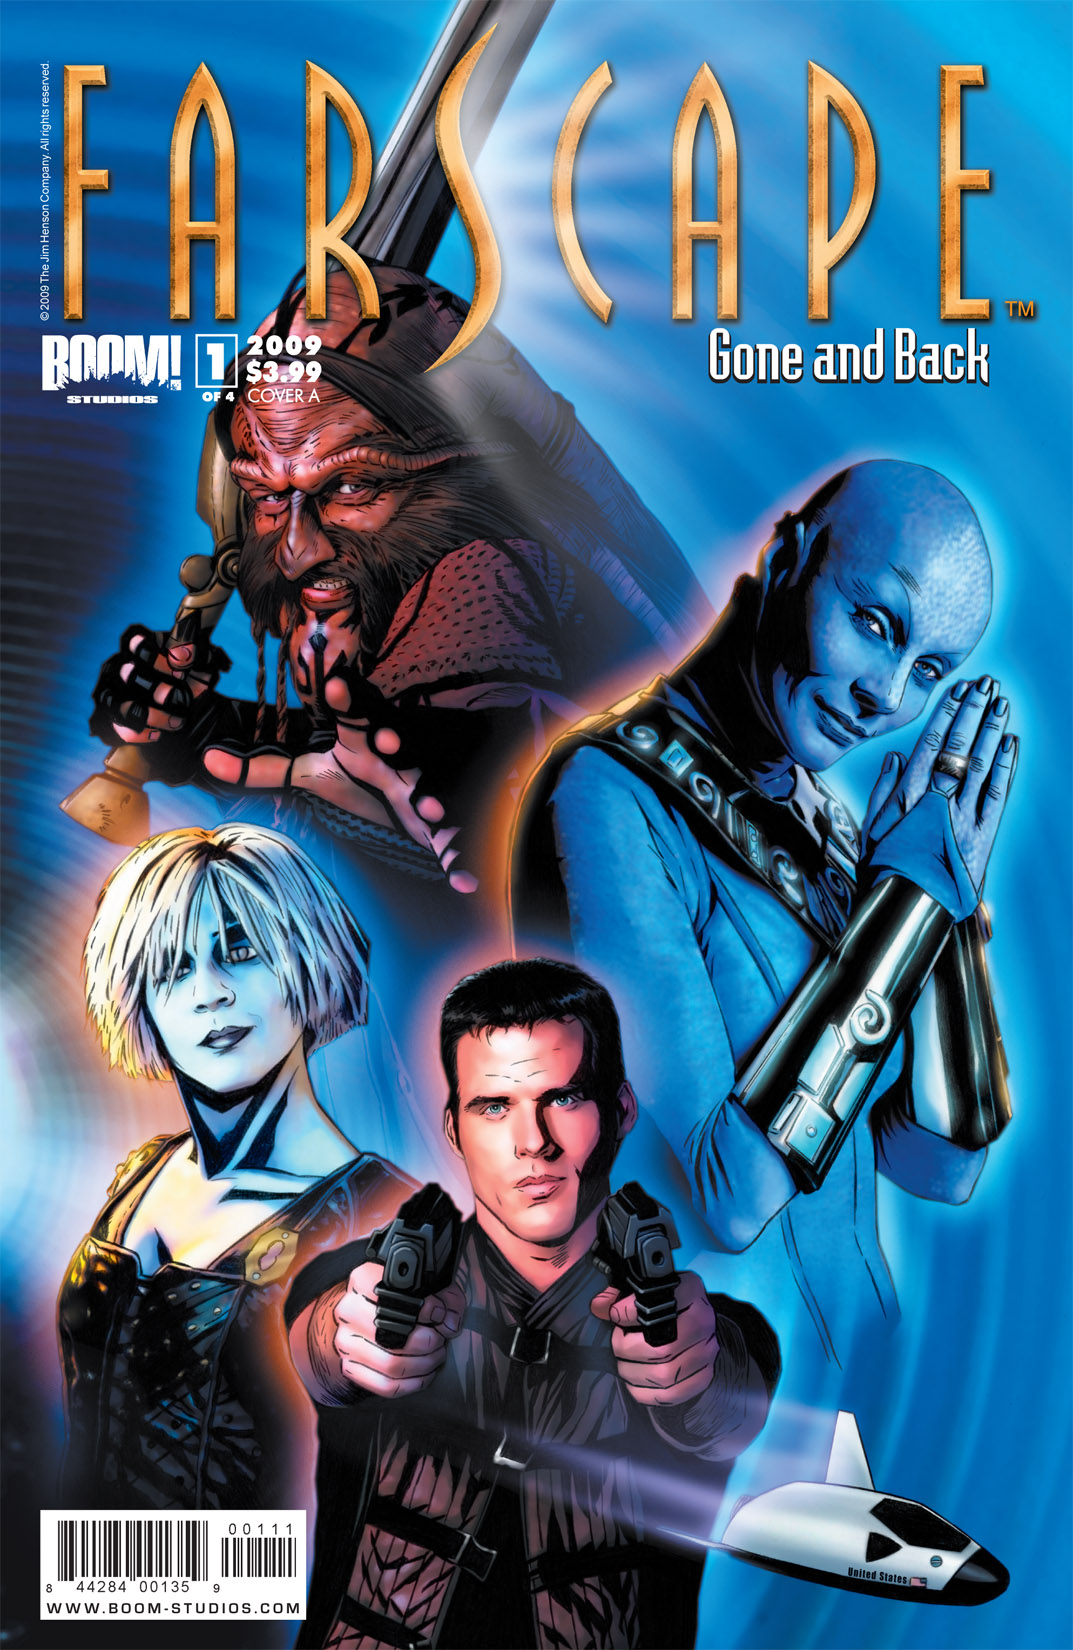 Read online Farscape: Gone and Back comic -  Issue #1 - 1